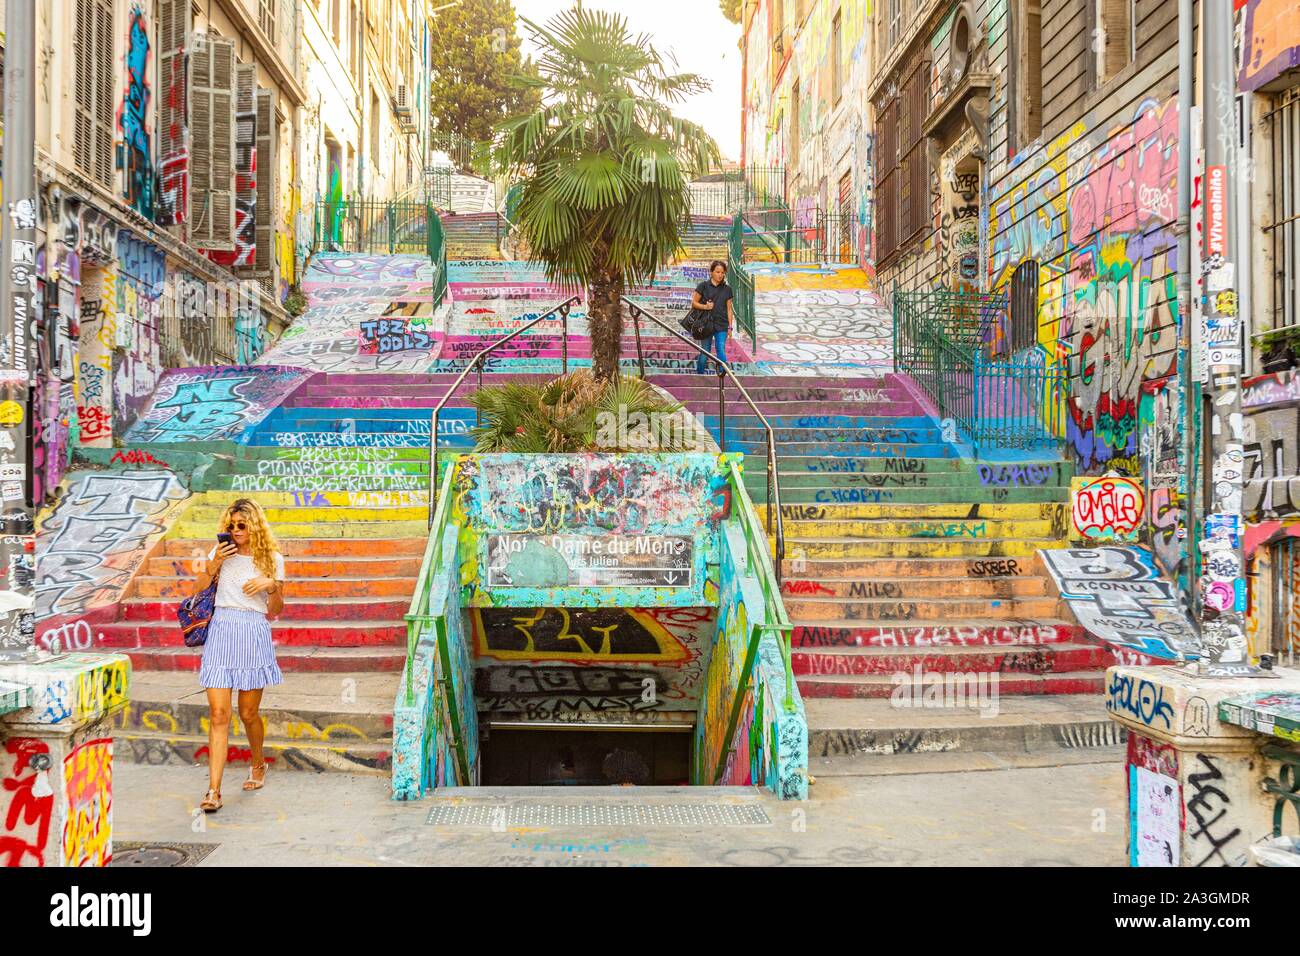 France, Bouches du Rhone, Marseille, the Cours Julien staircase, Street Art with tagg and graffiti Stock Photo